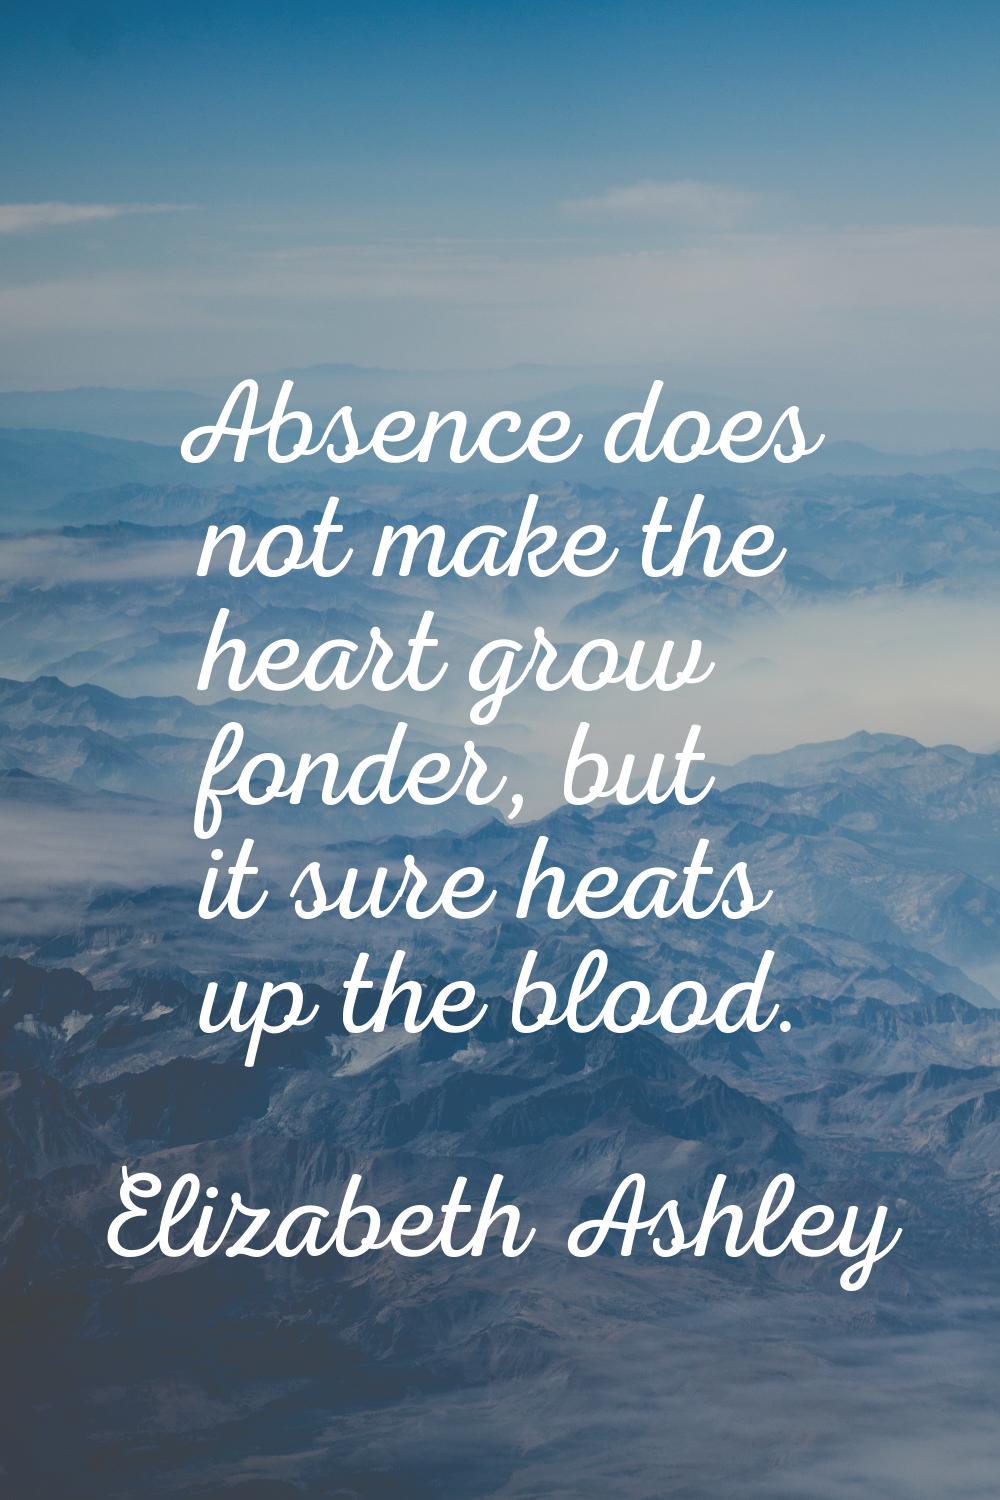 Absence does not make the heart grow fonder, but it sure heats up the blood.